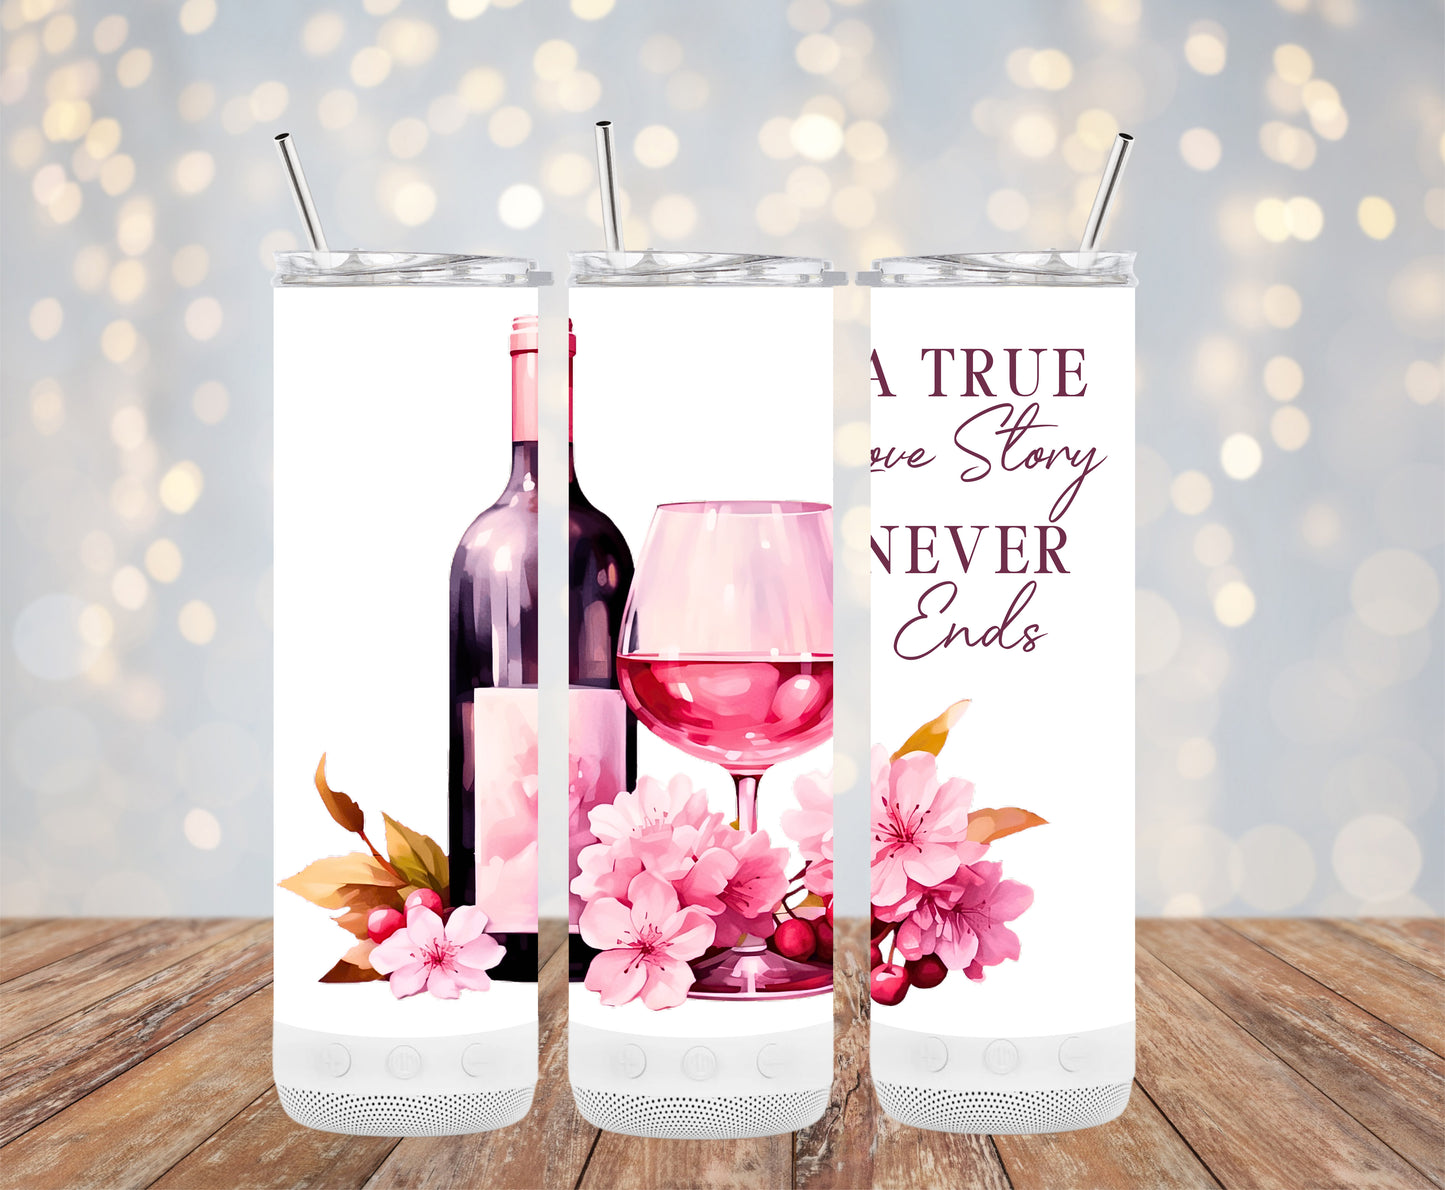 A True Love Story Never Ends (Valentine Tumbler)